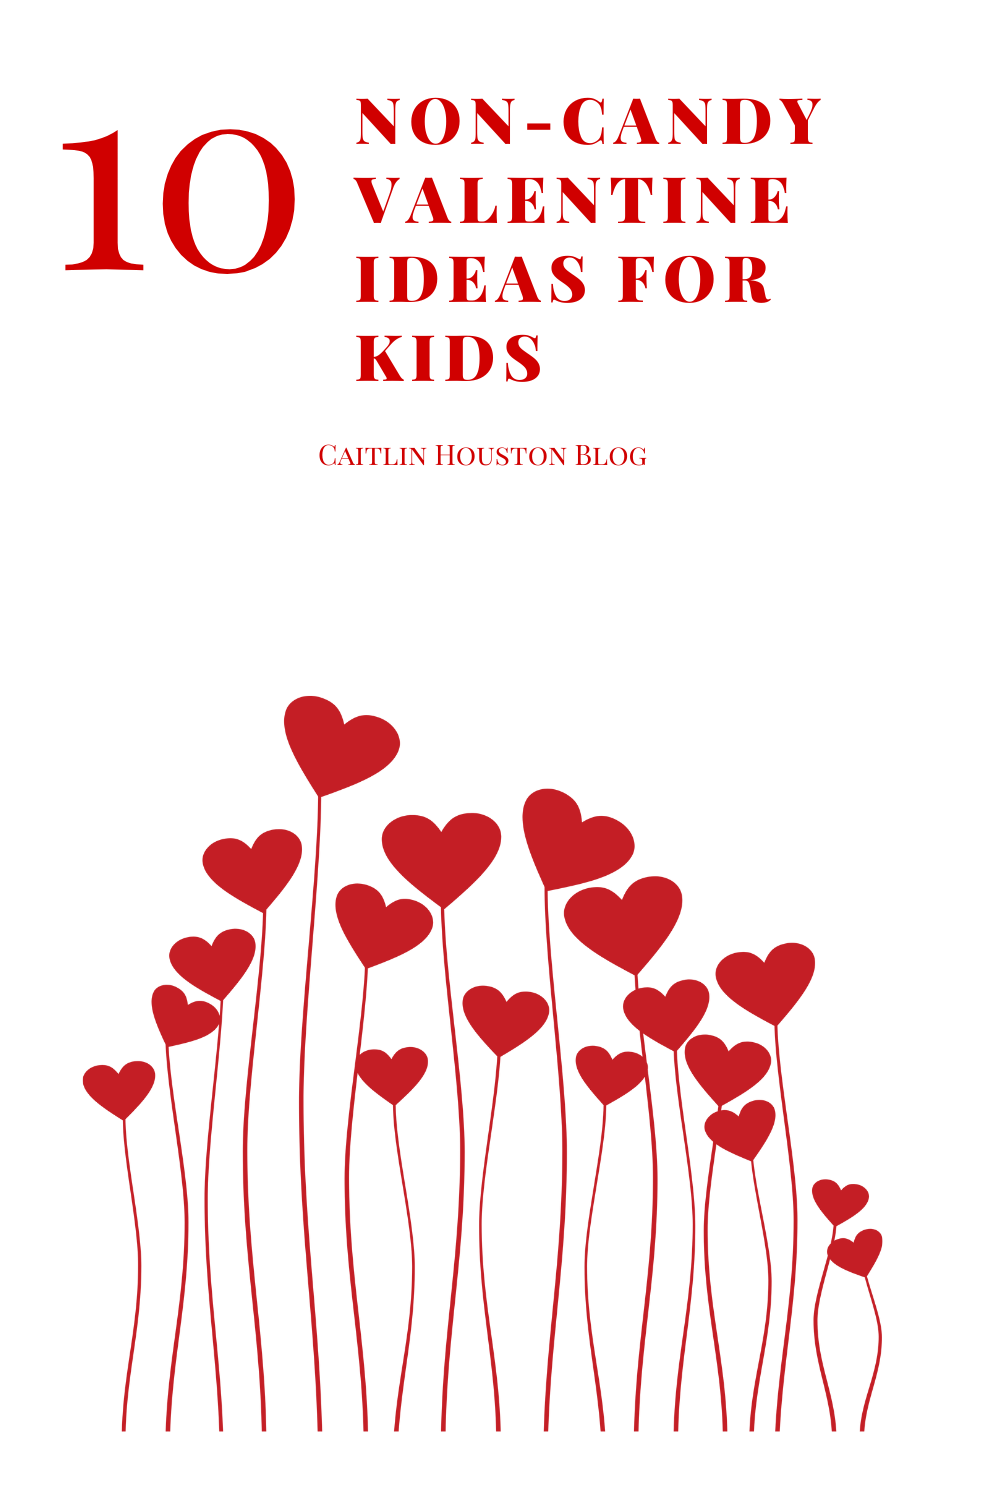 Non-Candy Valentine Ideas for Kids